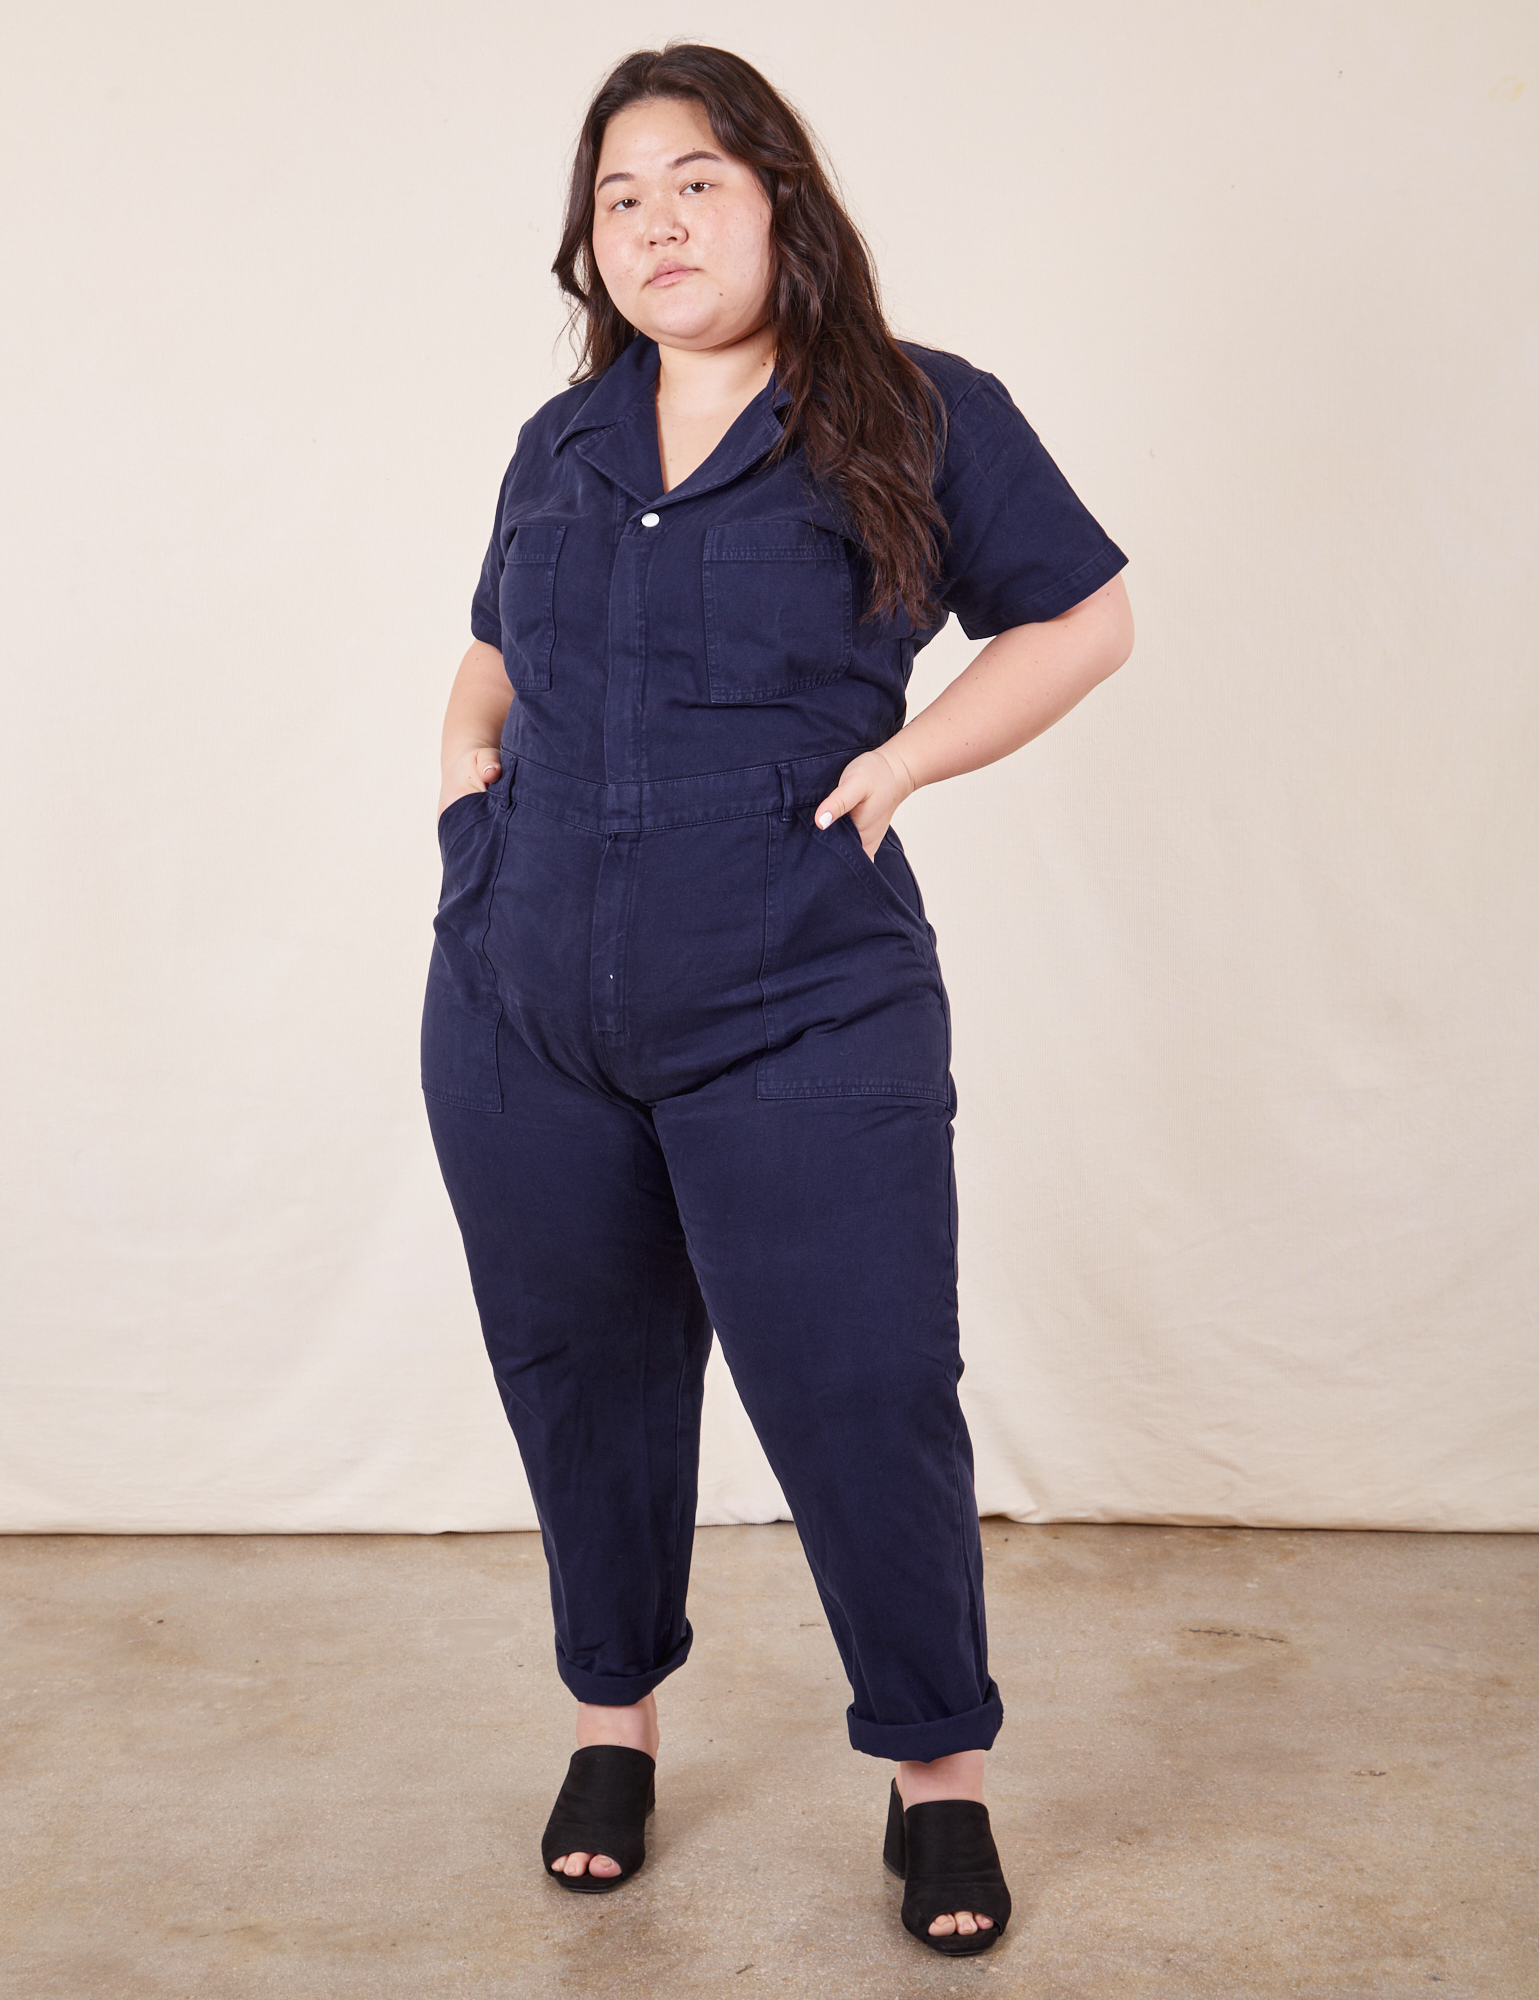 Ashley is 5&#39;7&quot; and wearing 1XL Short Sleeve Jumpsuit in Navy Blue